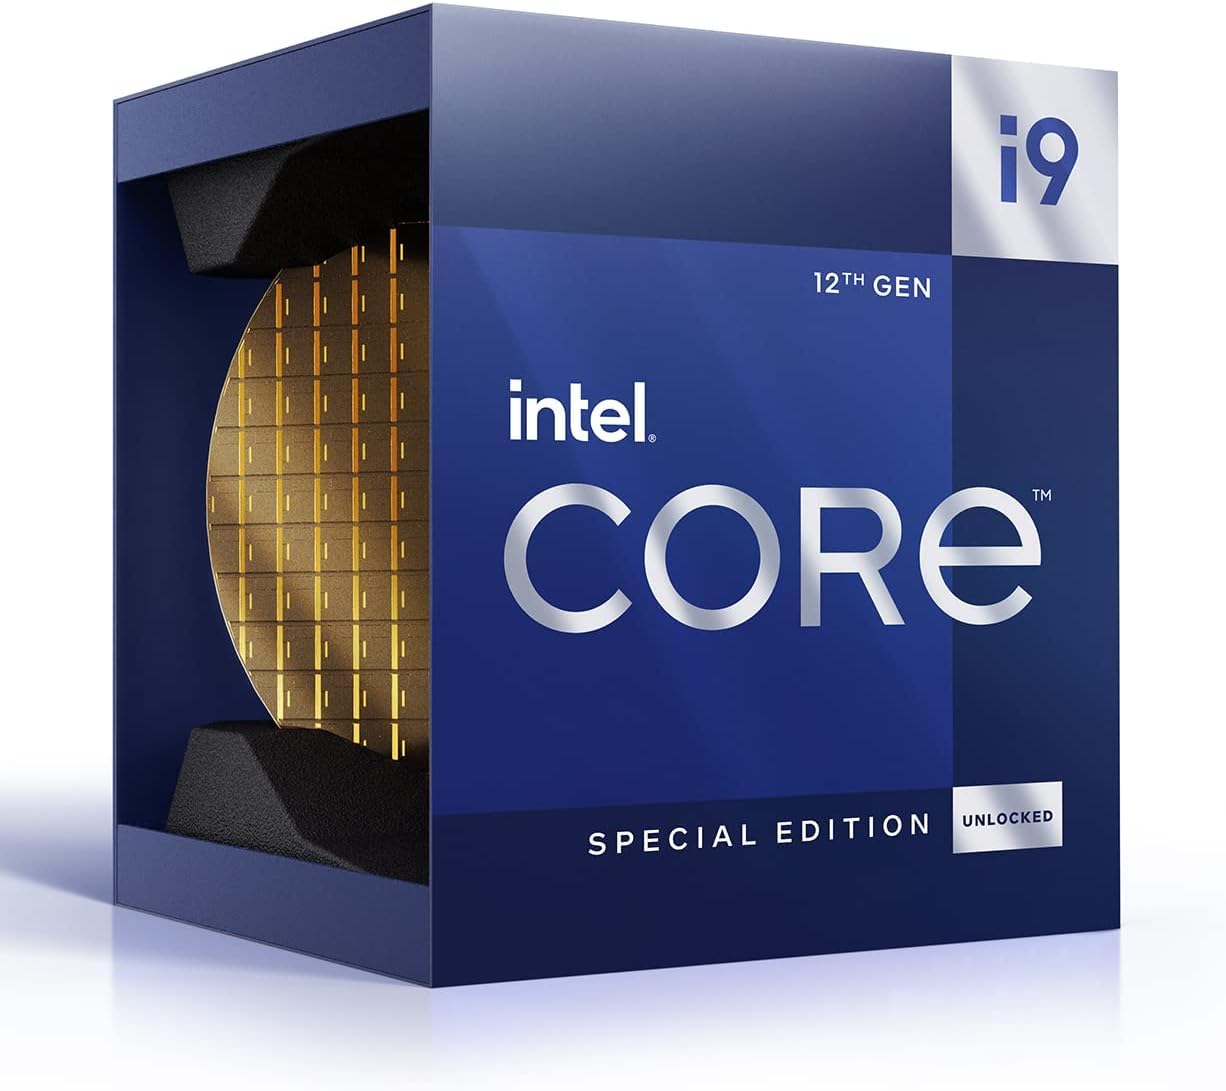 Intel Core i9 (12th Gen) i9-12900KS Gaming Desktop Processor with Integrated Graphics and Hexadeca-core (16 Core) 2.50 GHz $349